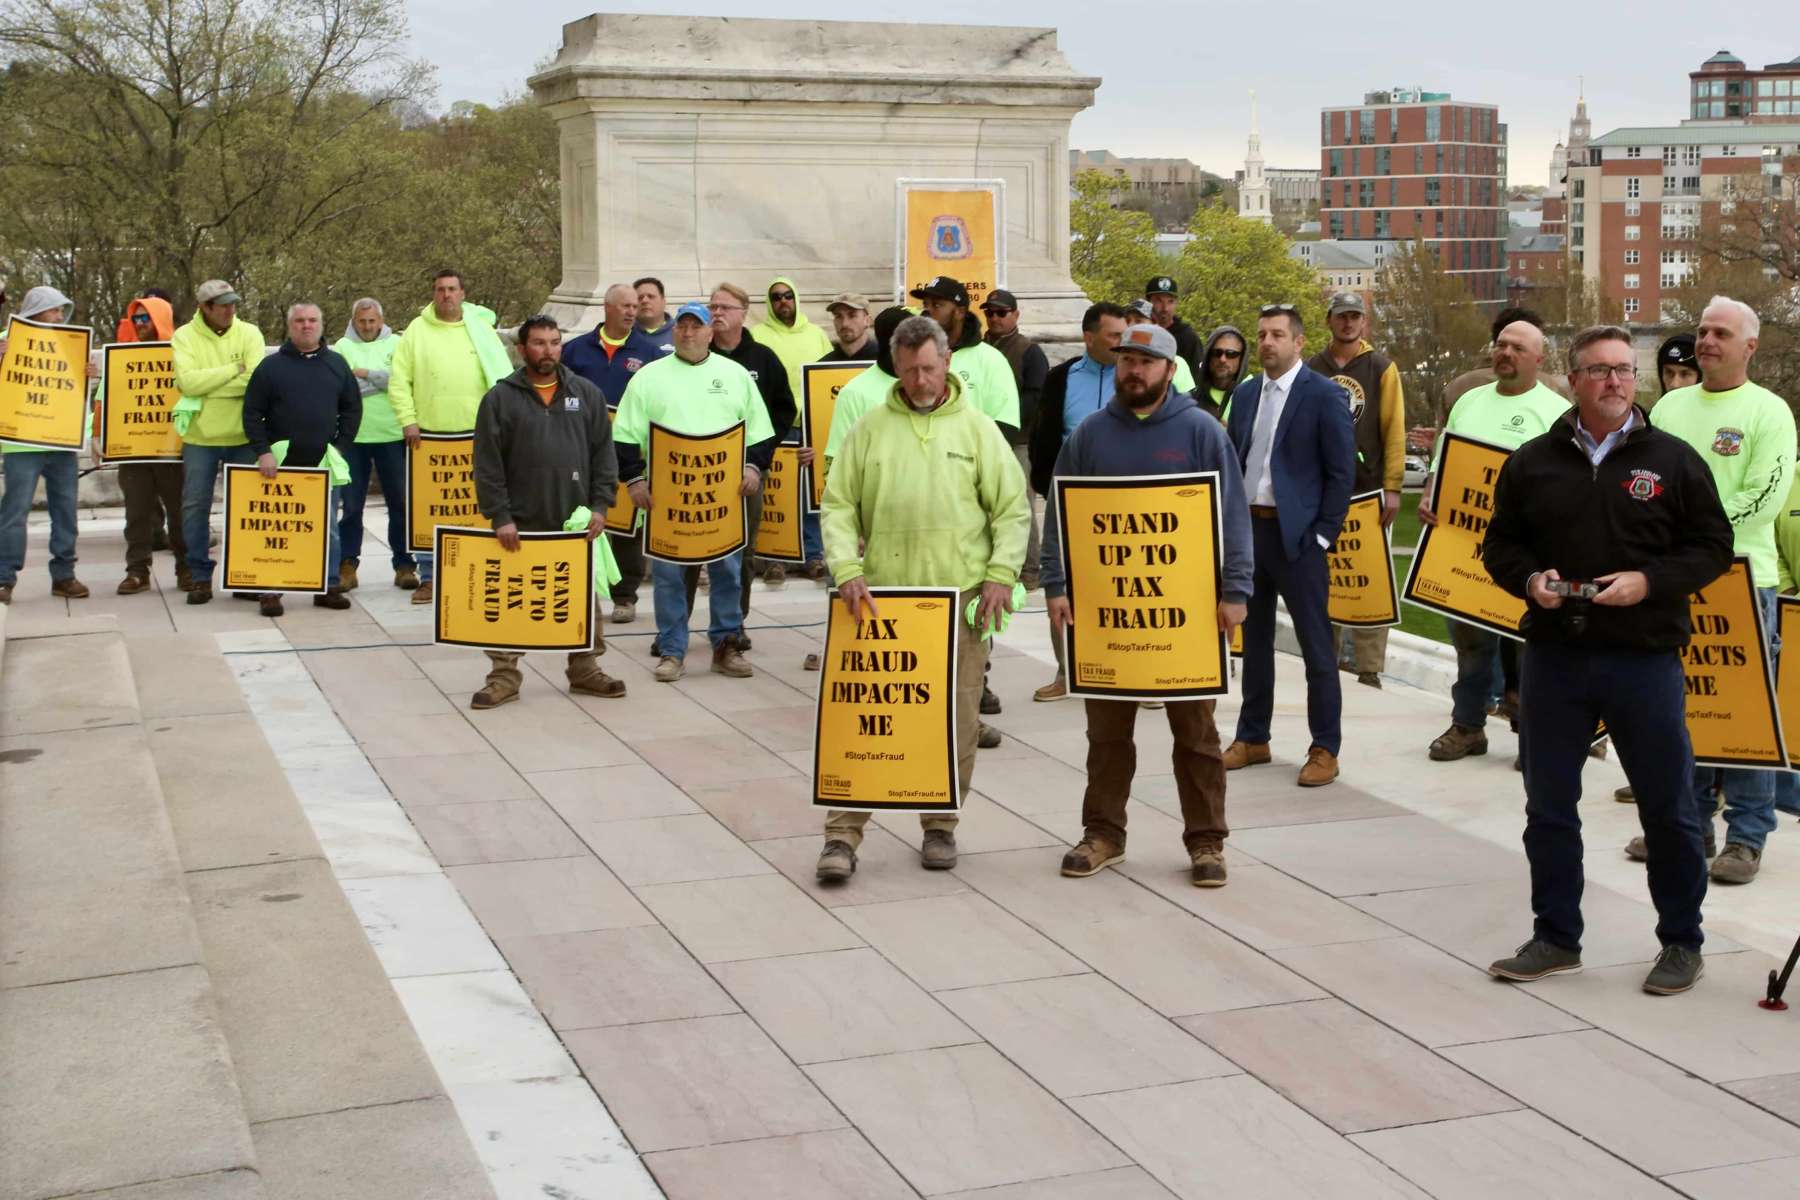 Rhode Island carpenters union fights wage theft & tax fraud at annual tax day of action